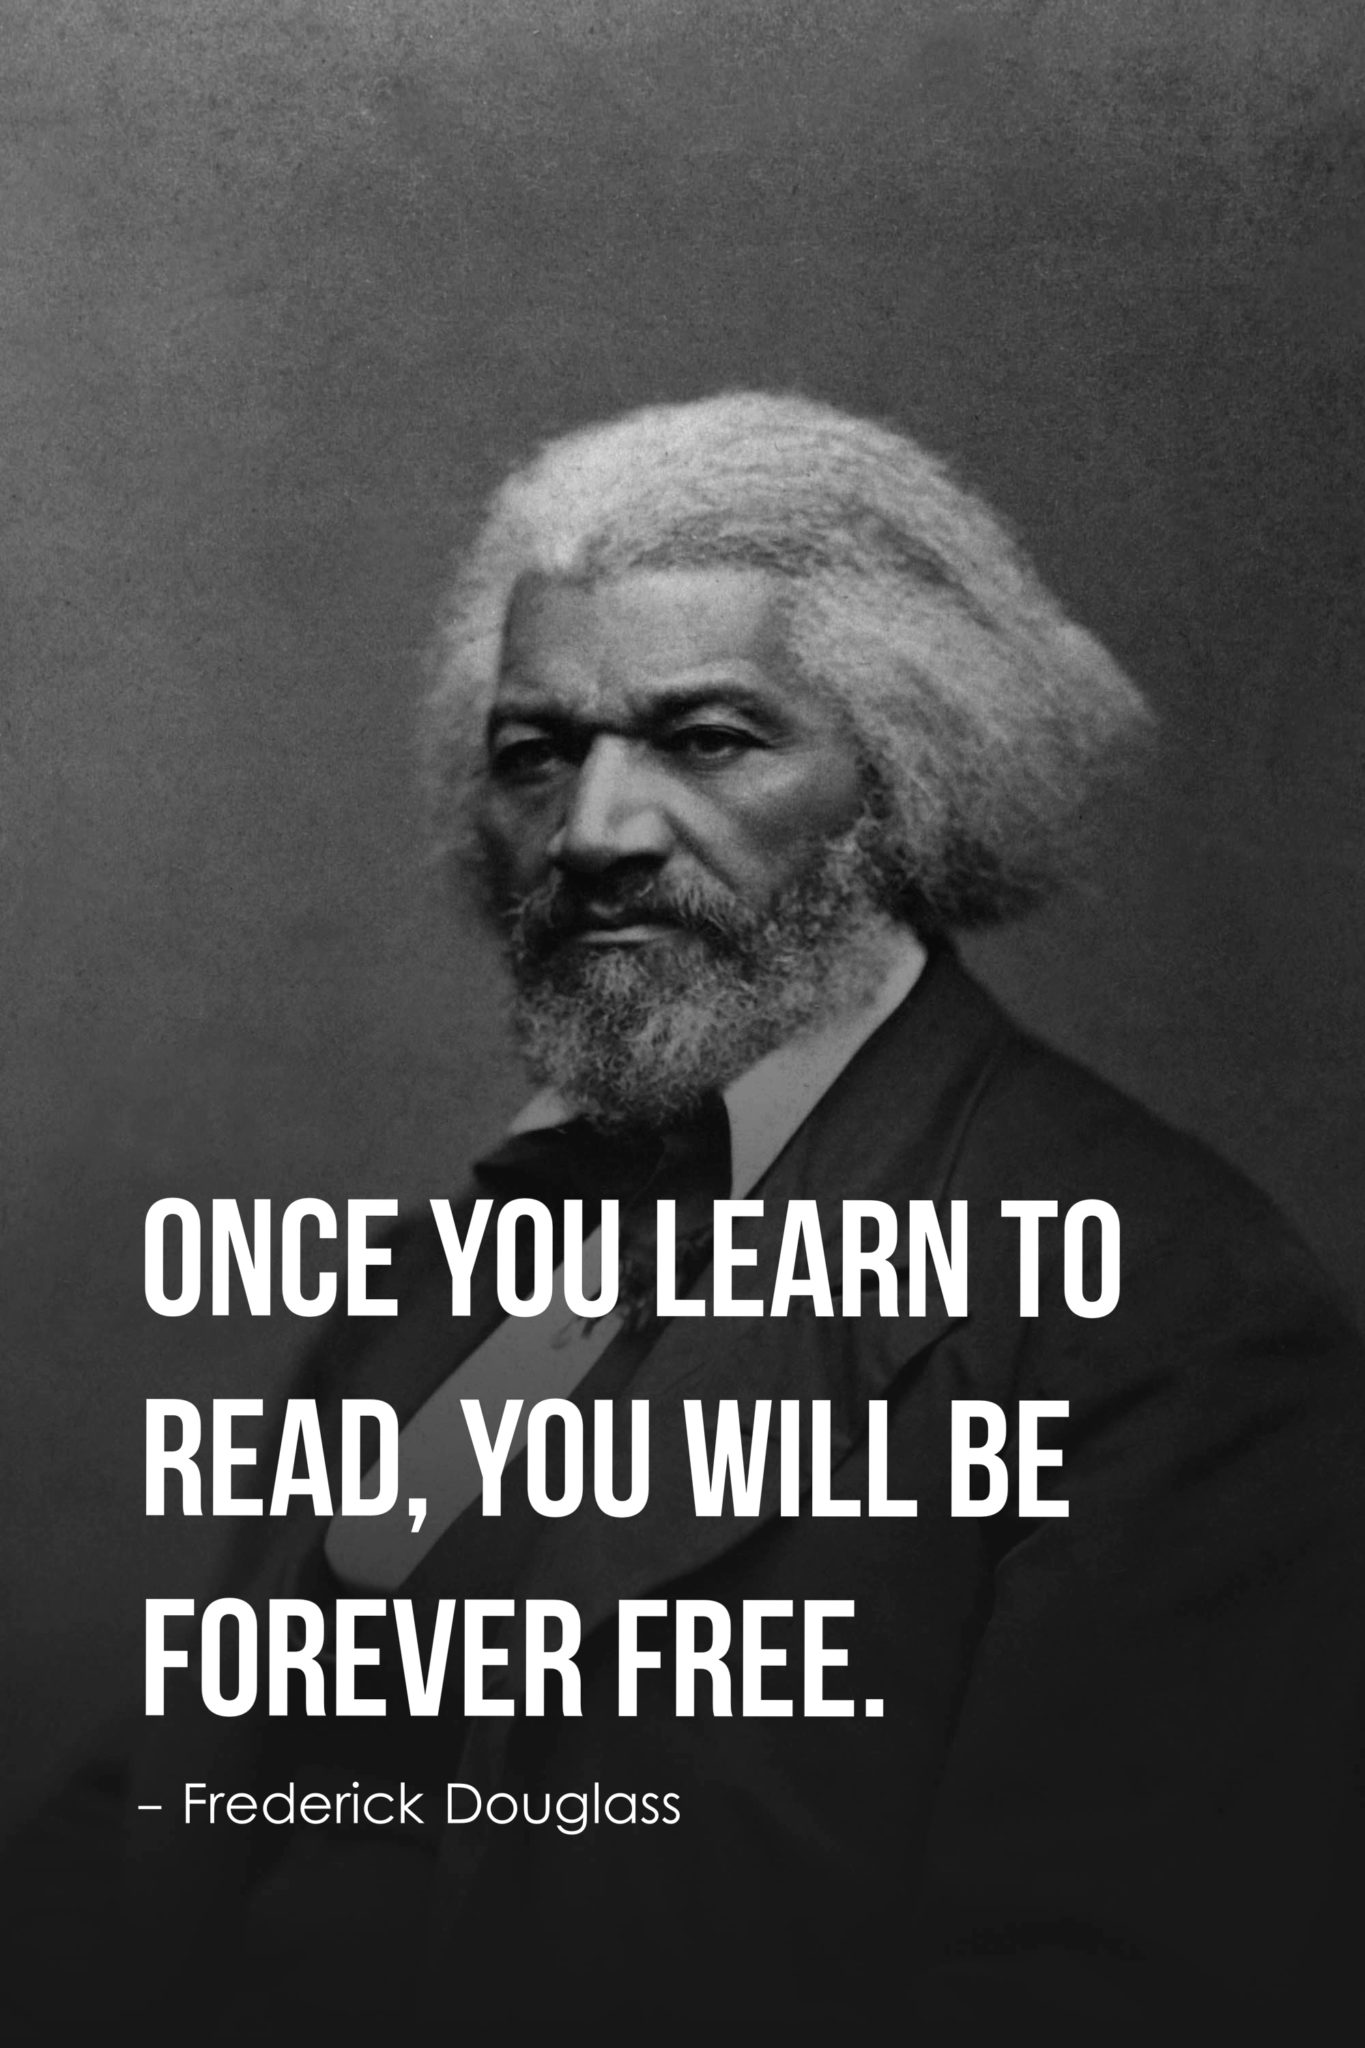 Once you learn to read, you will be forever free.